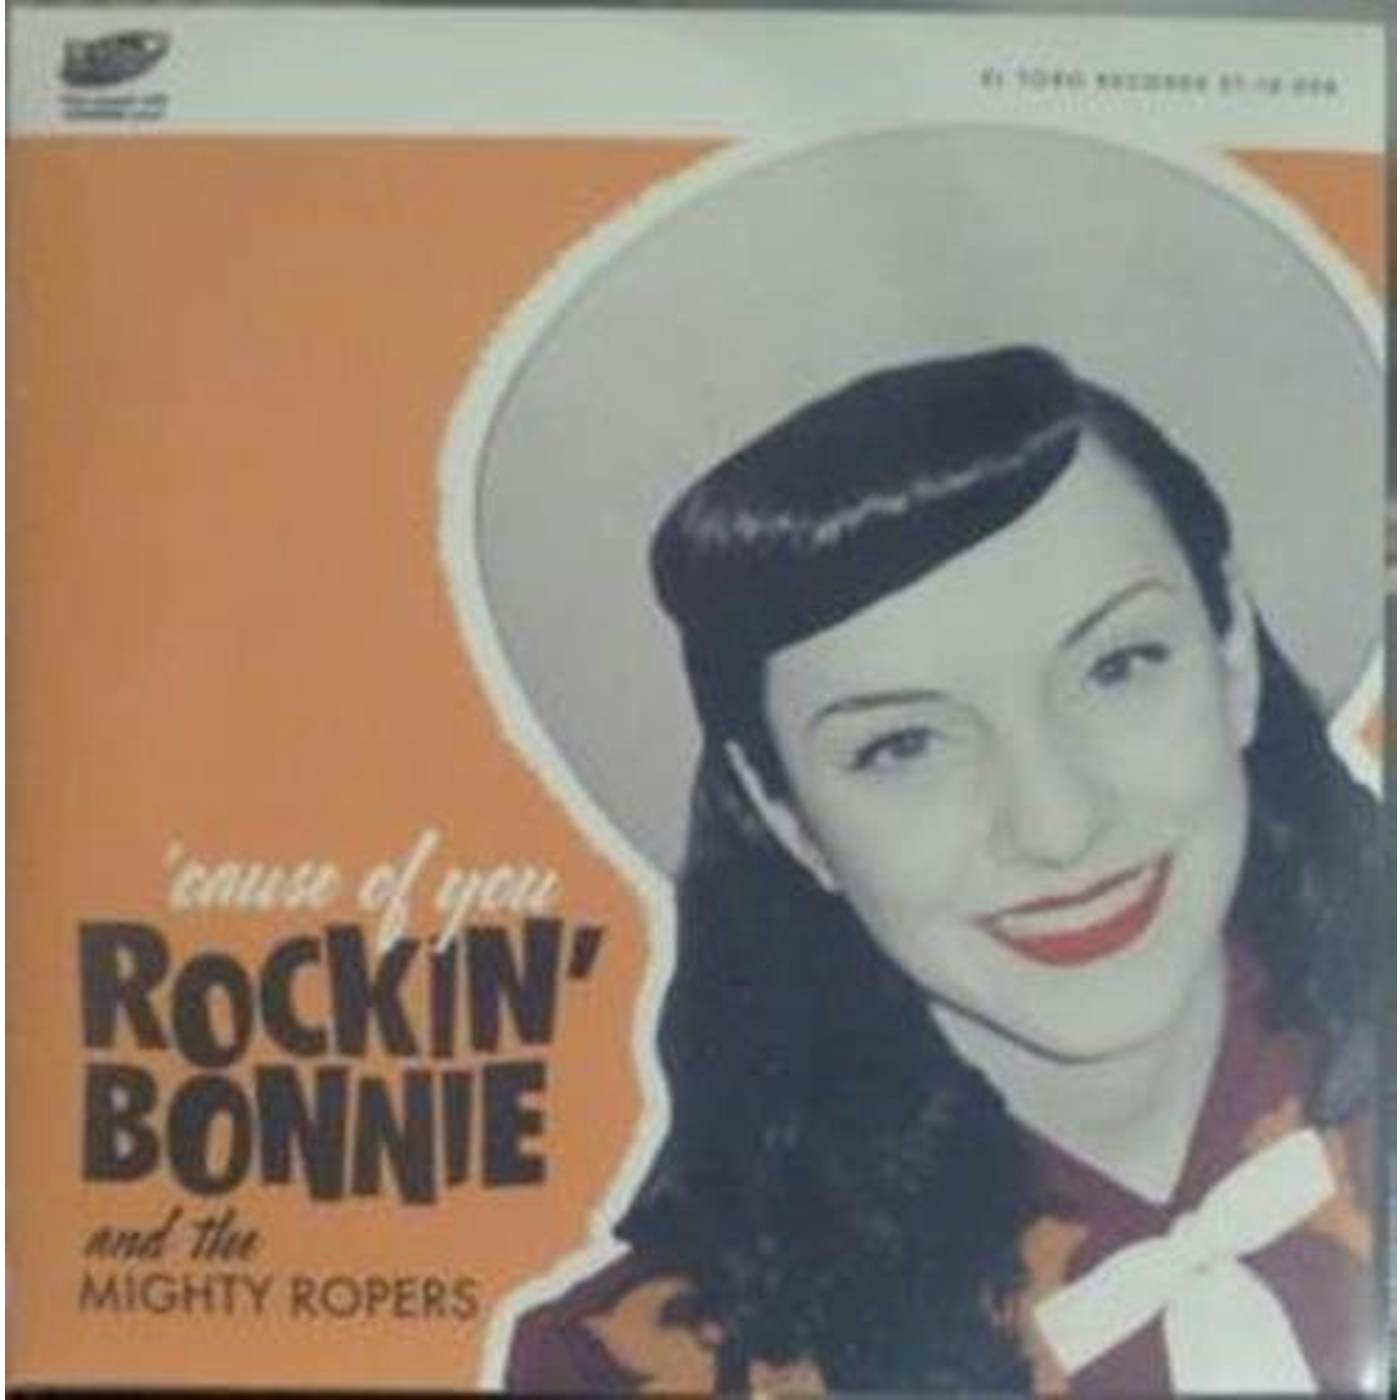 Rockin' Bonnie and the Mighty Ropers CAUSE OF YOU Vinyl Record